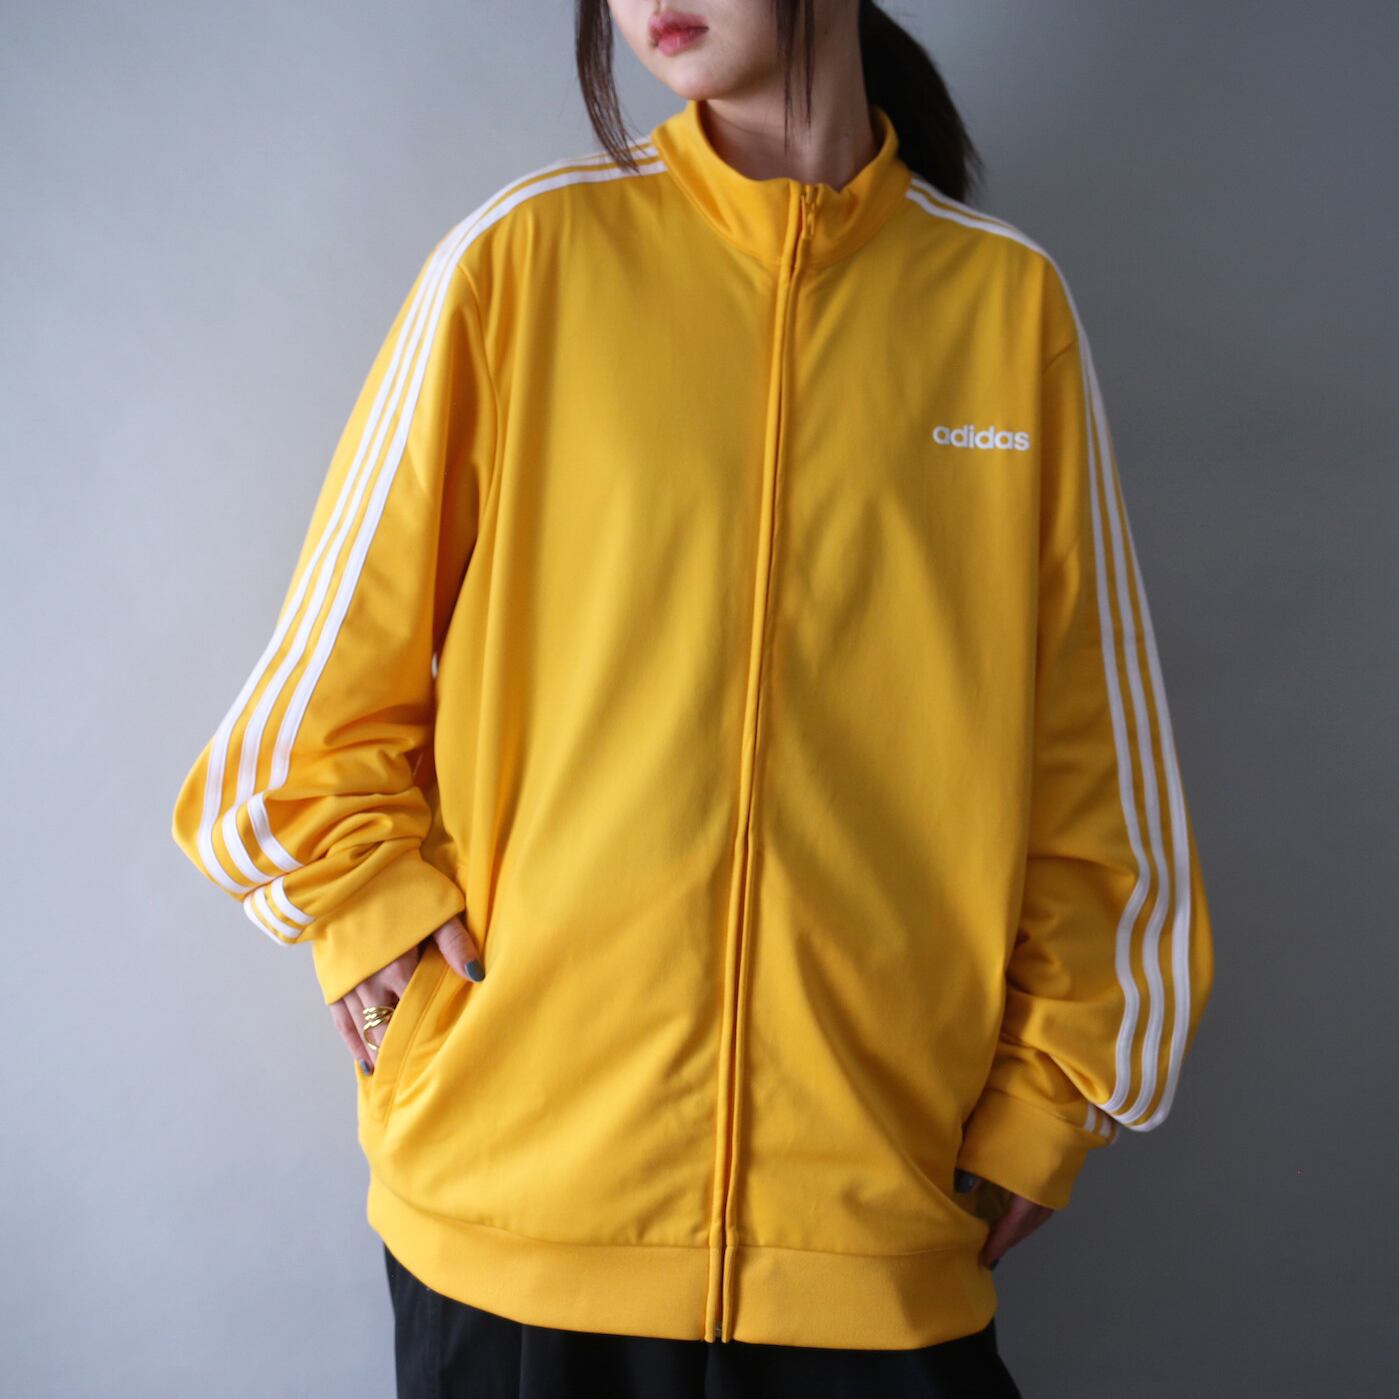 "adidas" good yellow over silhouette track jacket